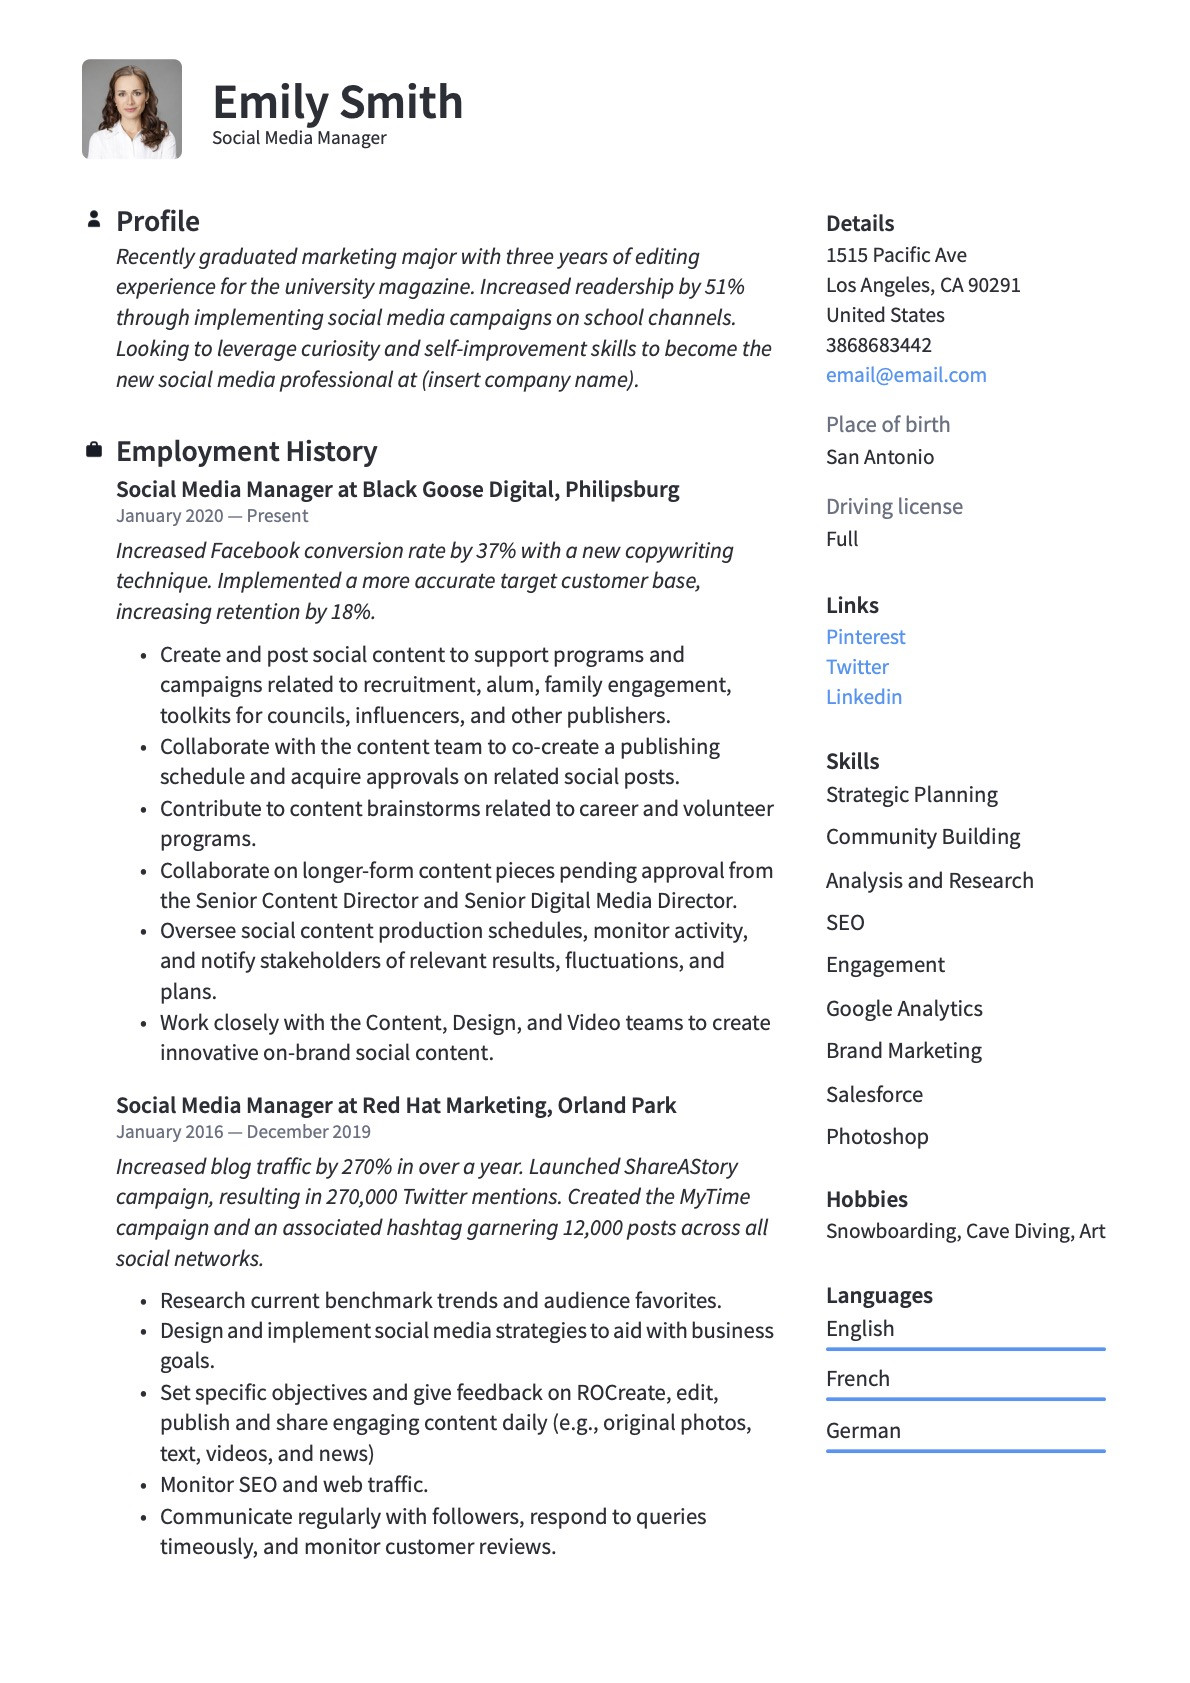 Digital Account Manager Resume Sample New York social Media Manager Resume & Guide  20 Templates